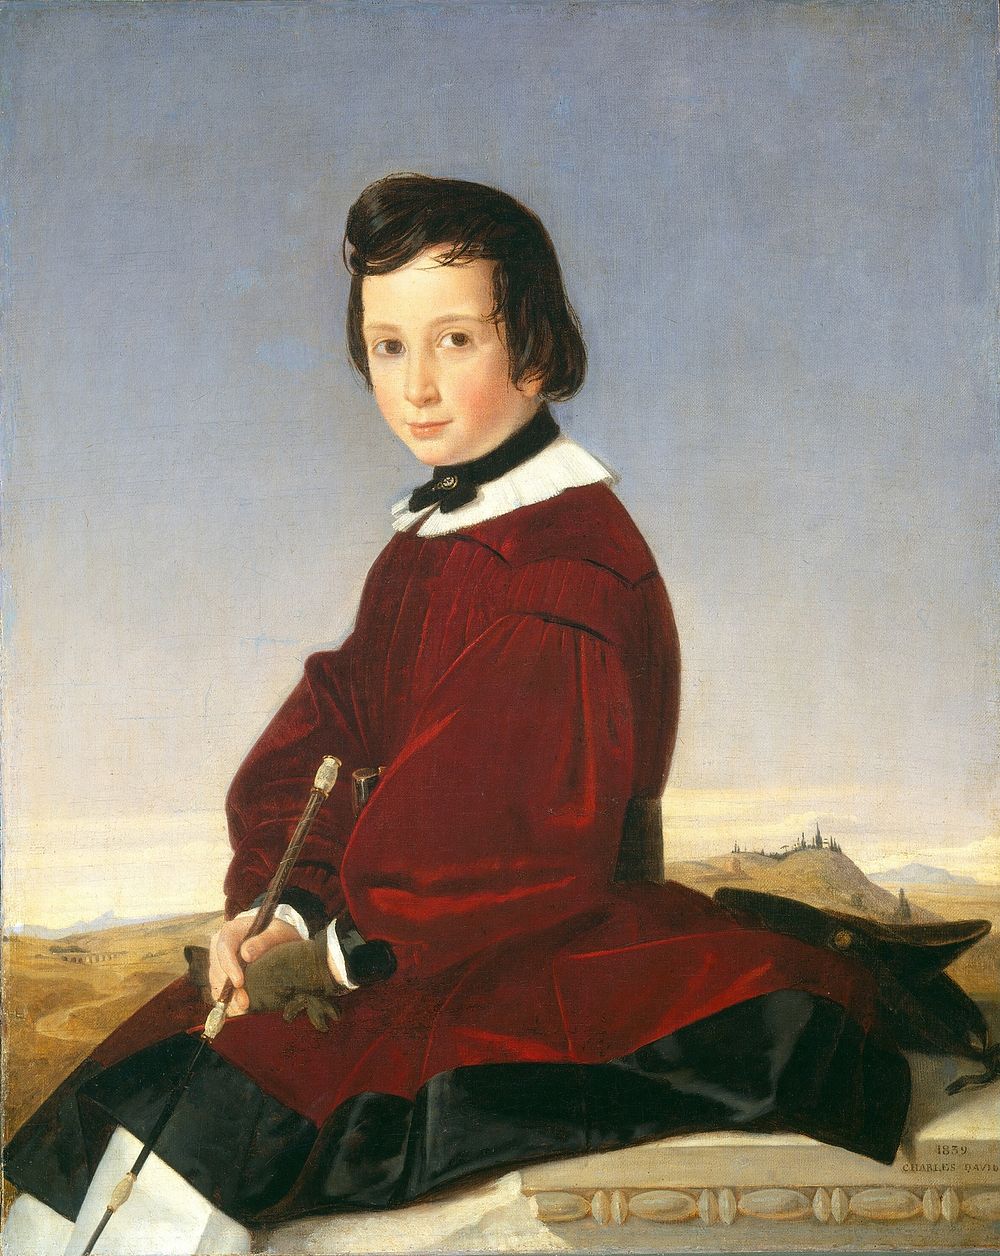 Portrait of a Young Horsewoman (1839) by Charles David.  